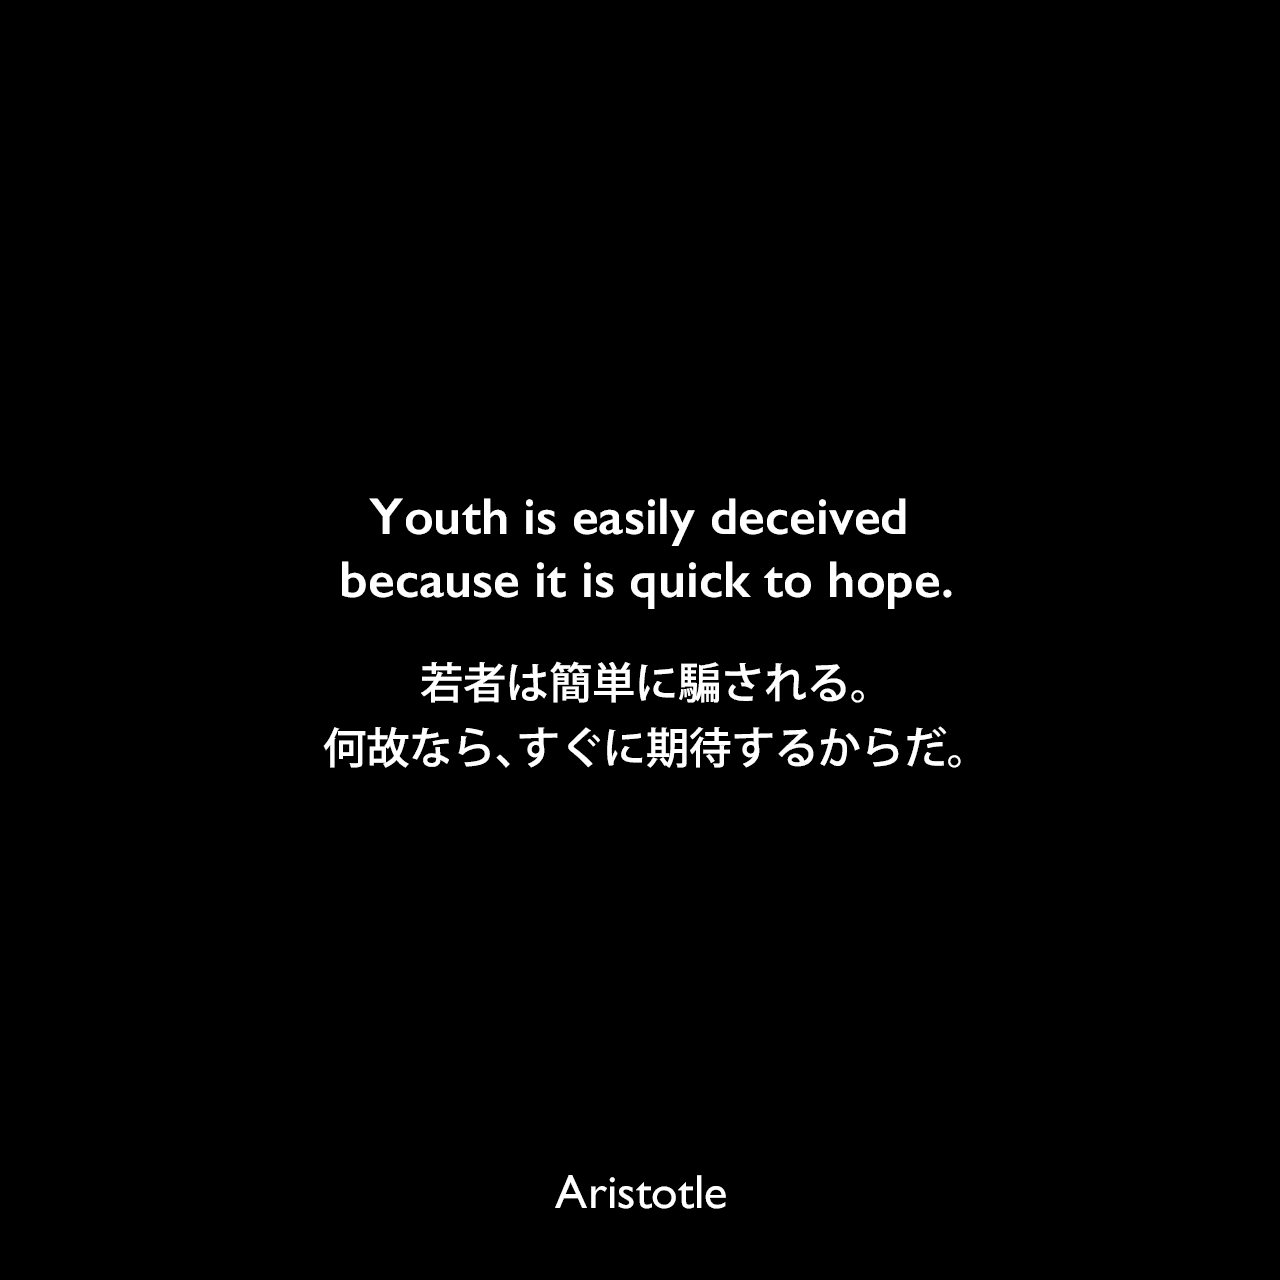 Youth is easily deceived because it is quick to hope.若者は簡単に騙される。何故なら、すぐに期待するからだ。Aristotle